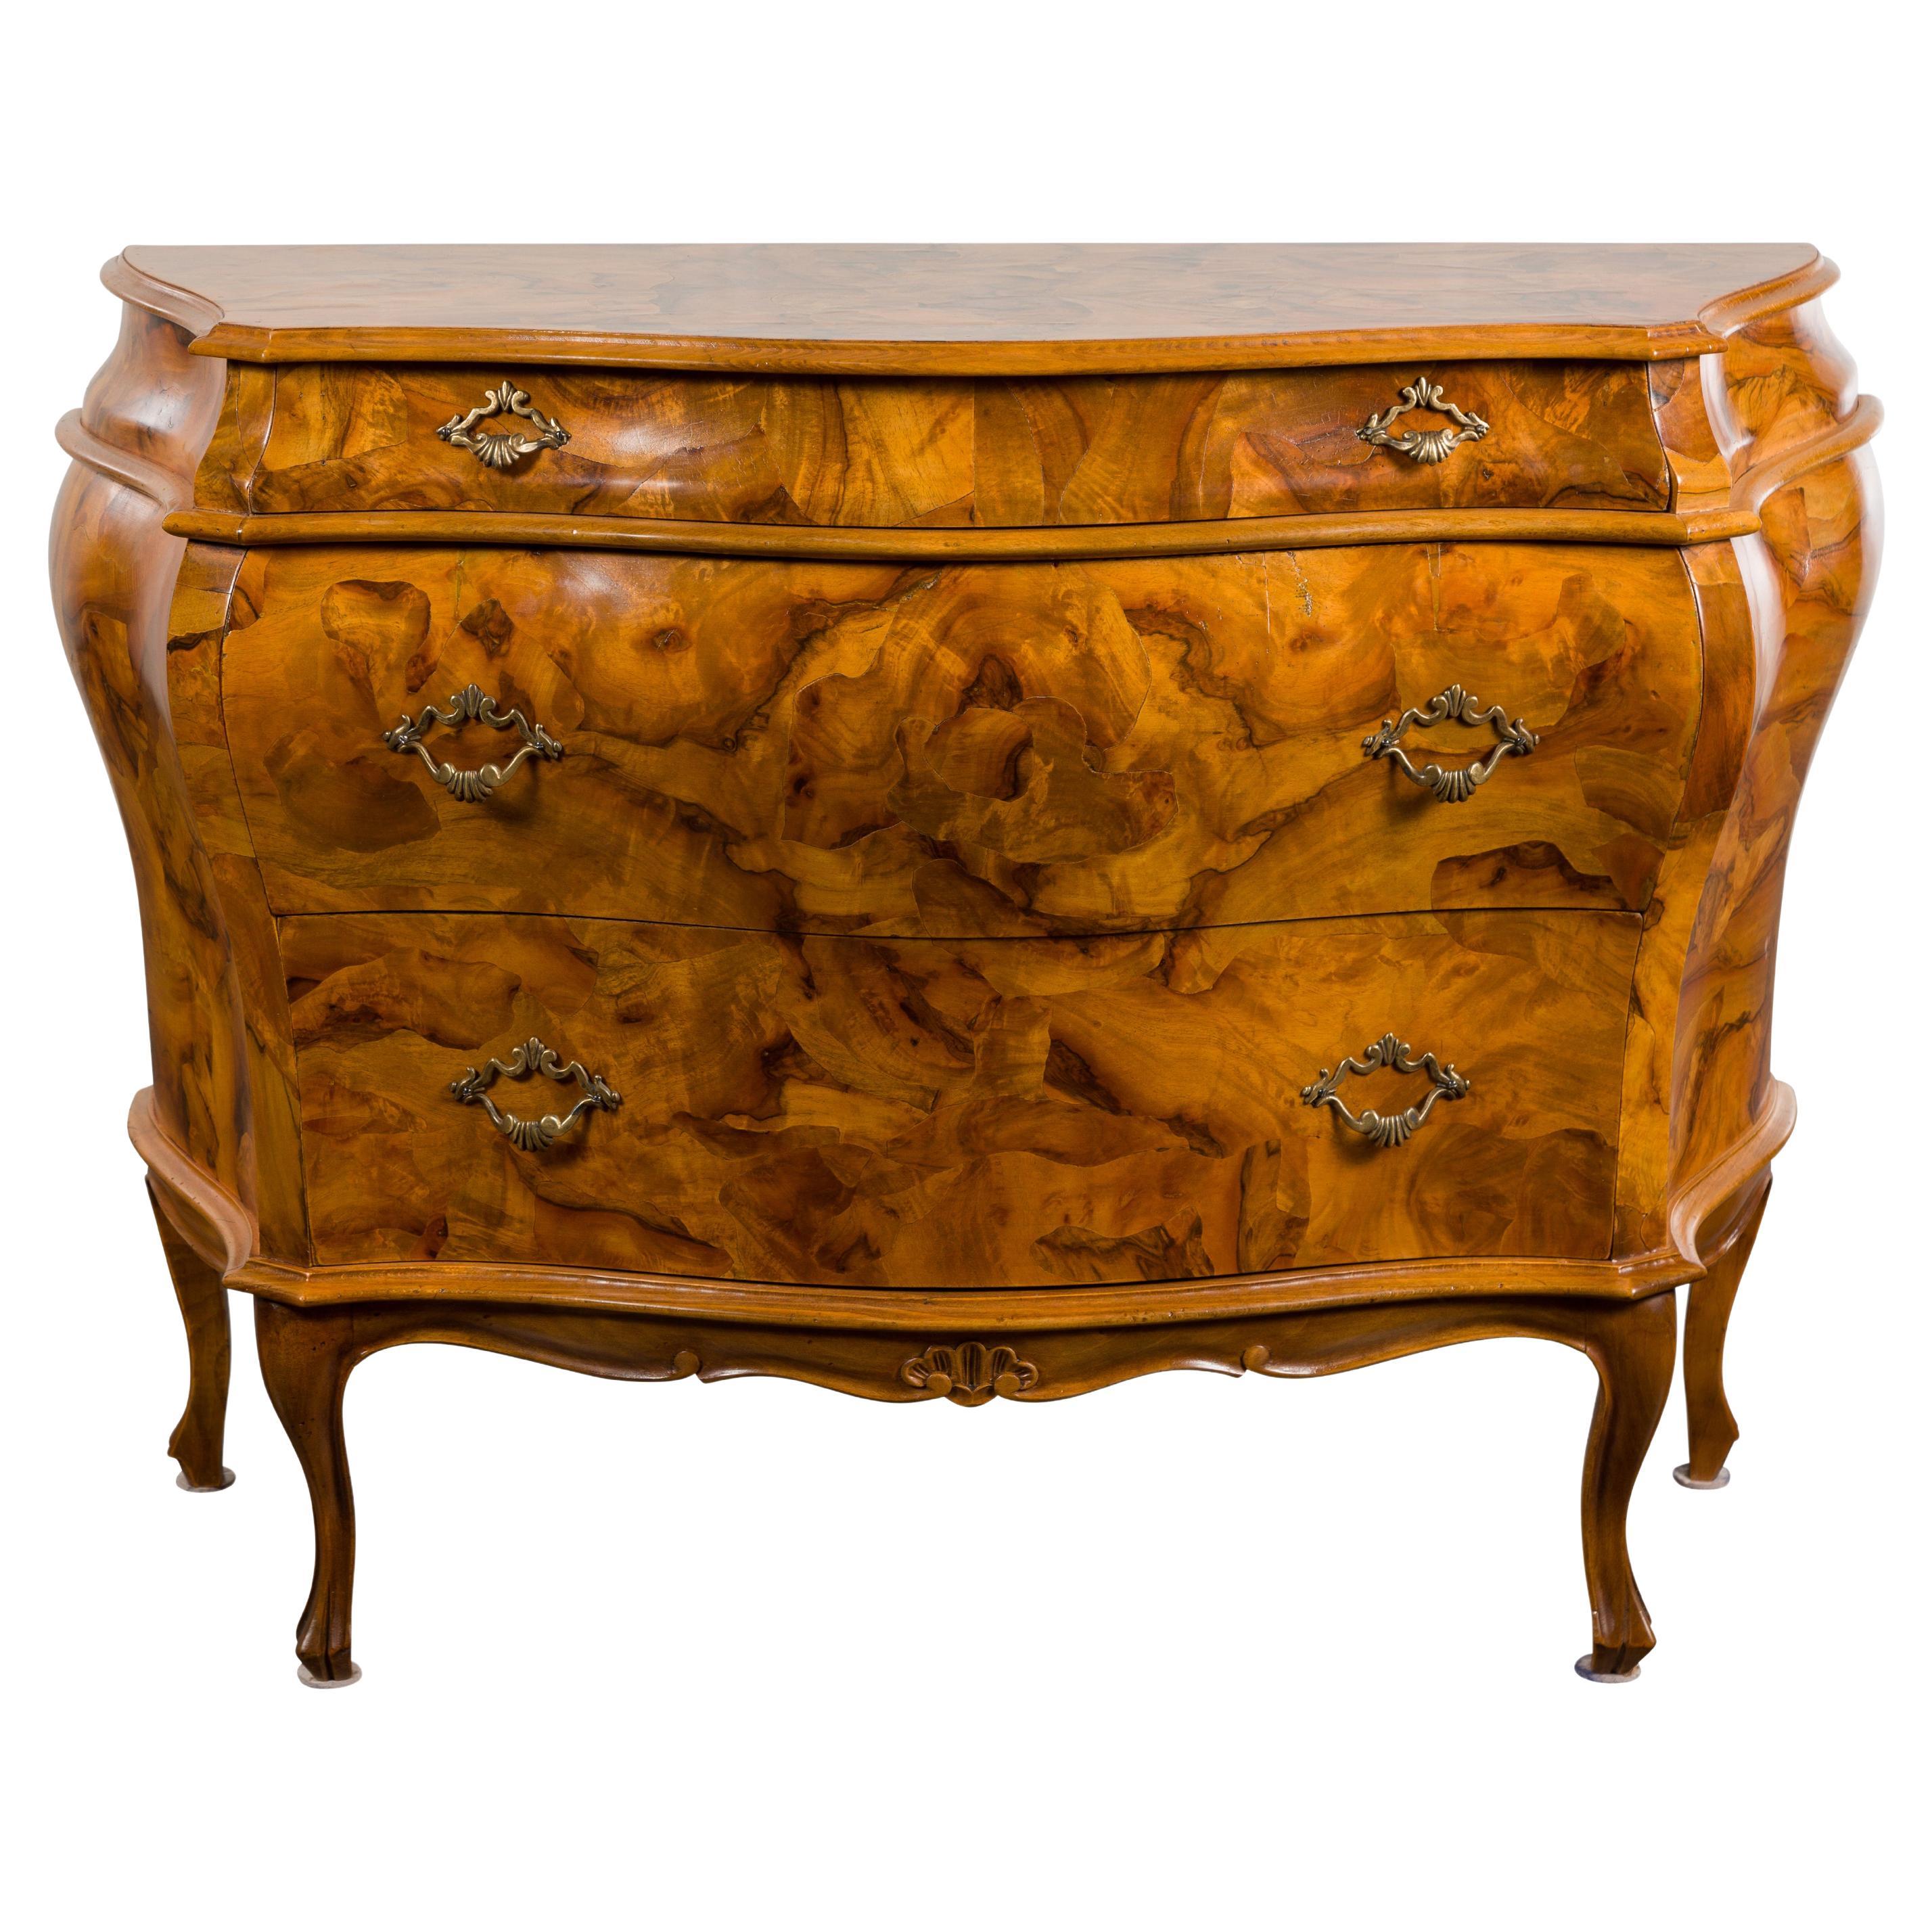 Italian Midcentury Rococo Style Bombé Chest with Three Drawers and Cabriole Legs For Sale